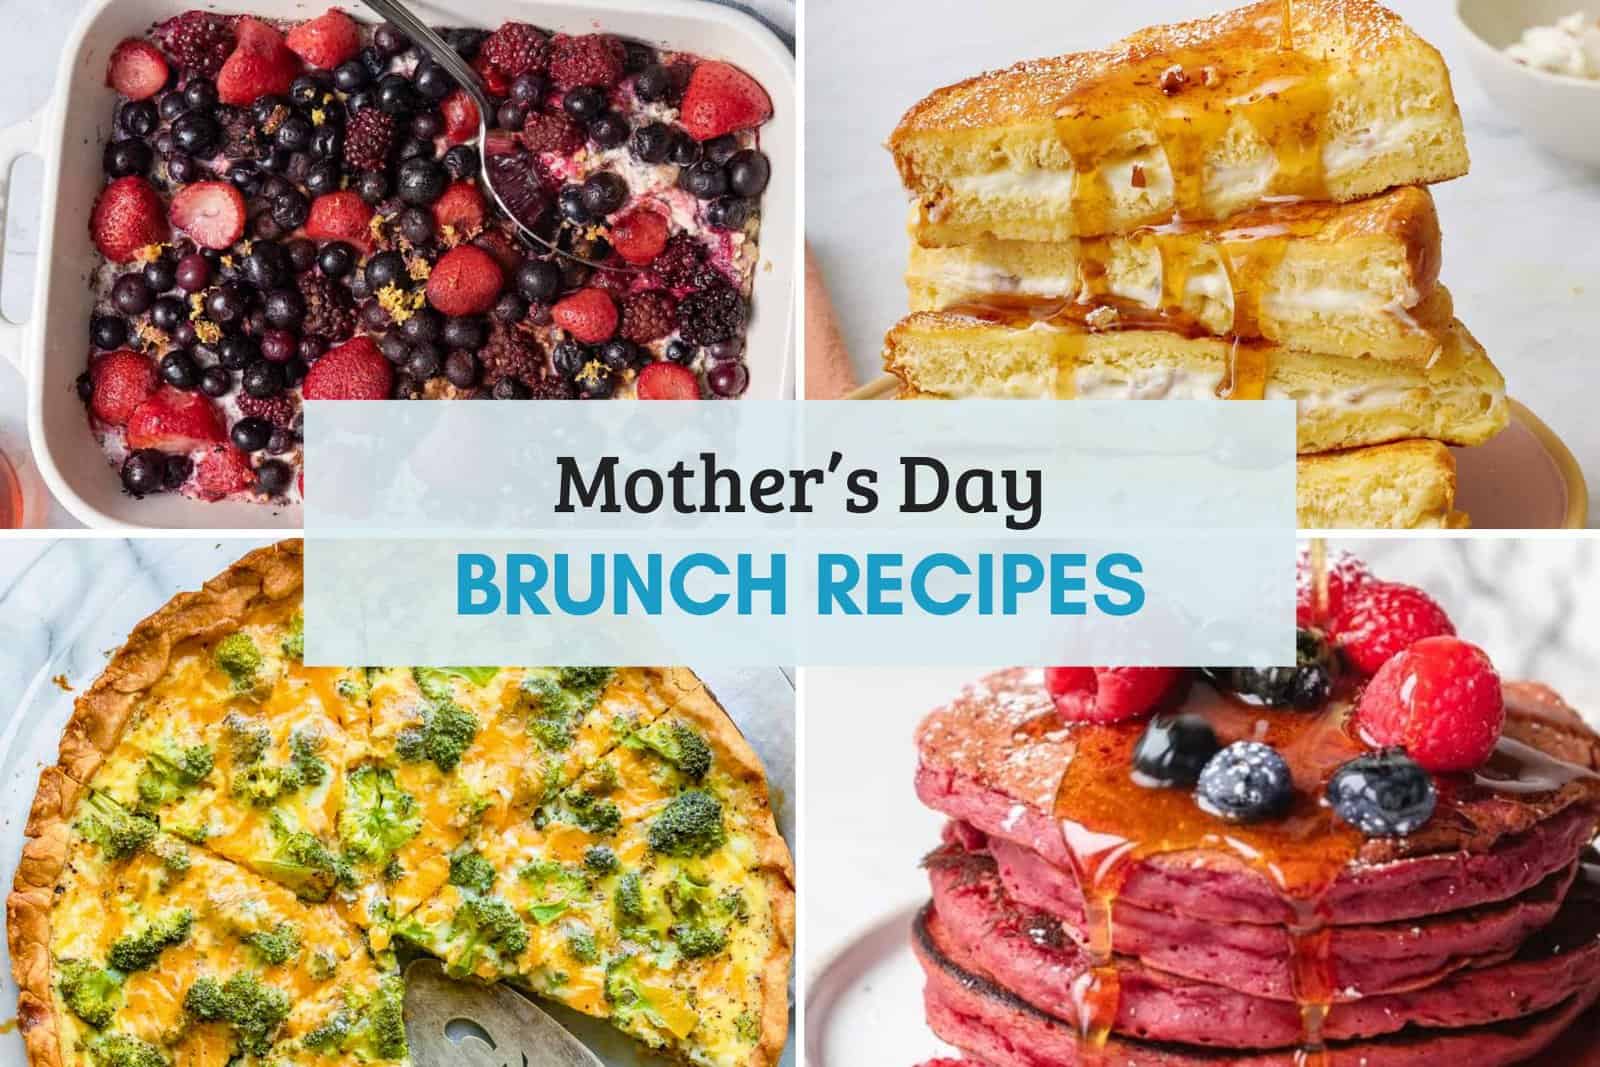 Mother's Day Brunch Ideas image for landing page.